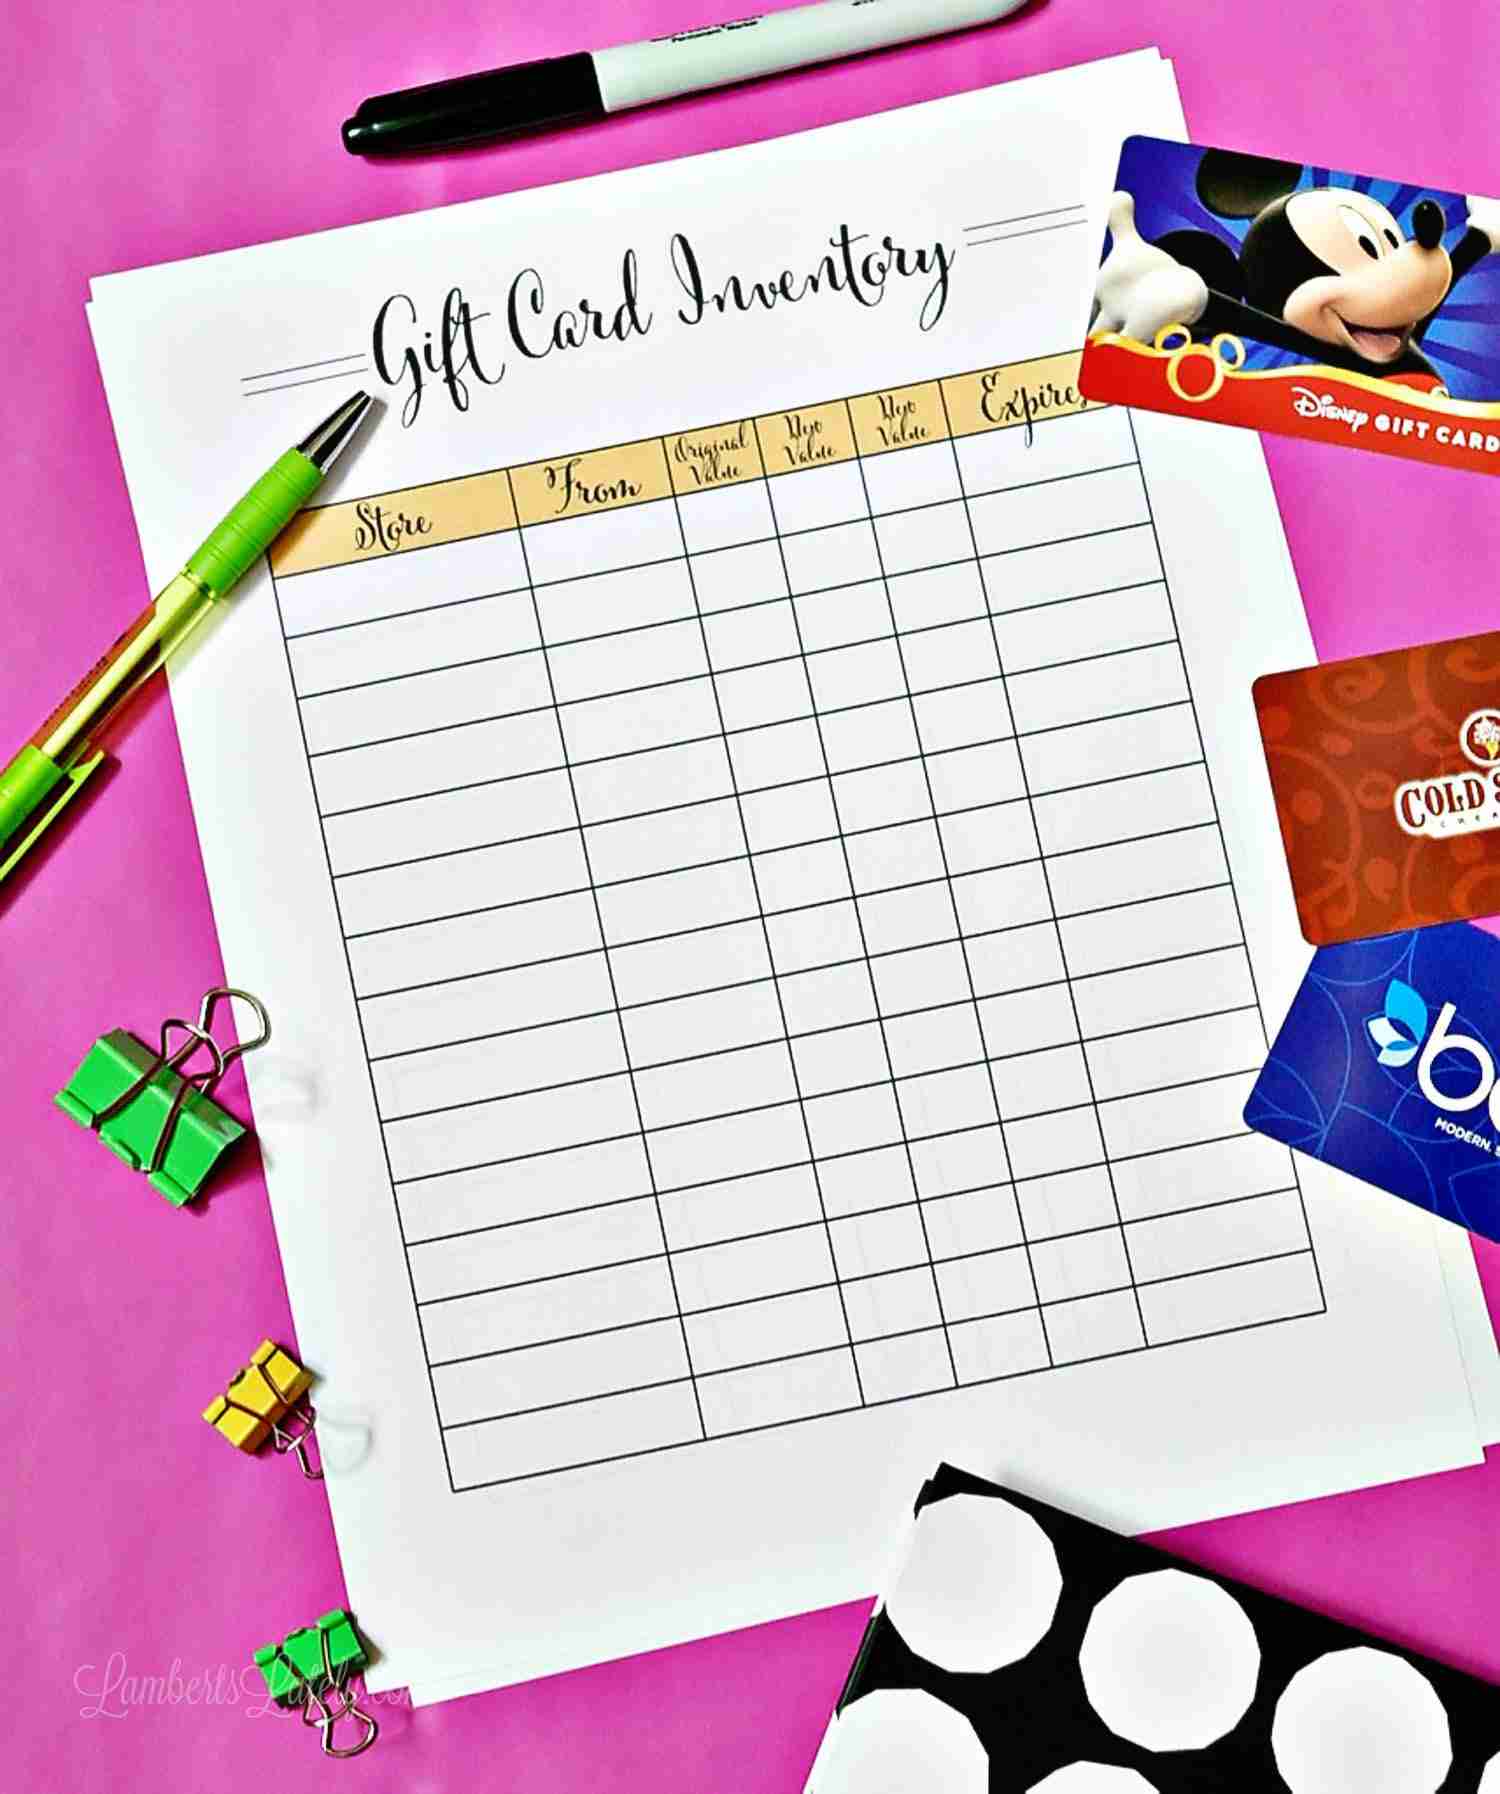 gift card inventory printable on a pink background, with gift cards and pens.